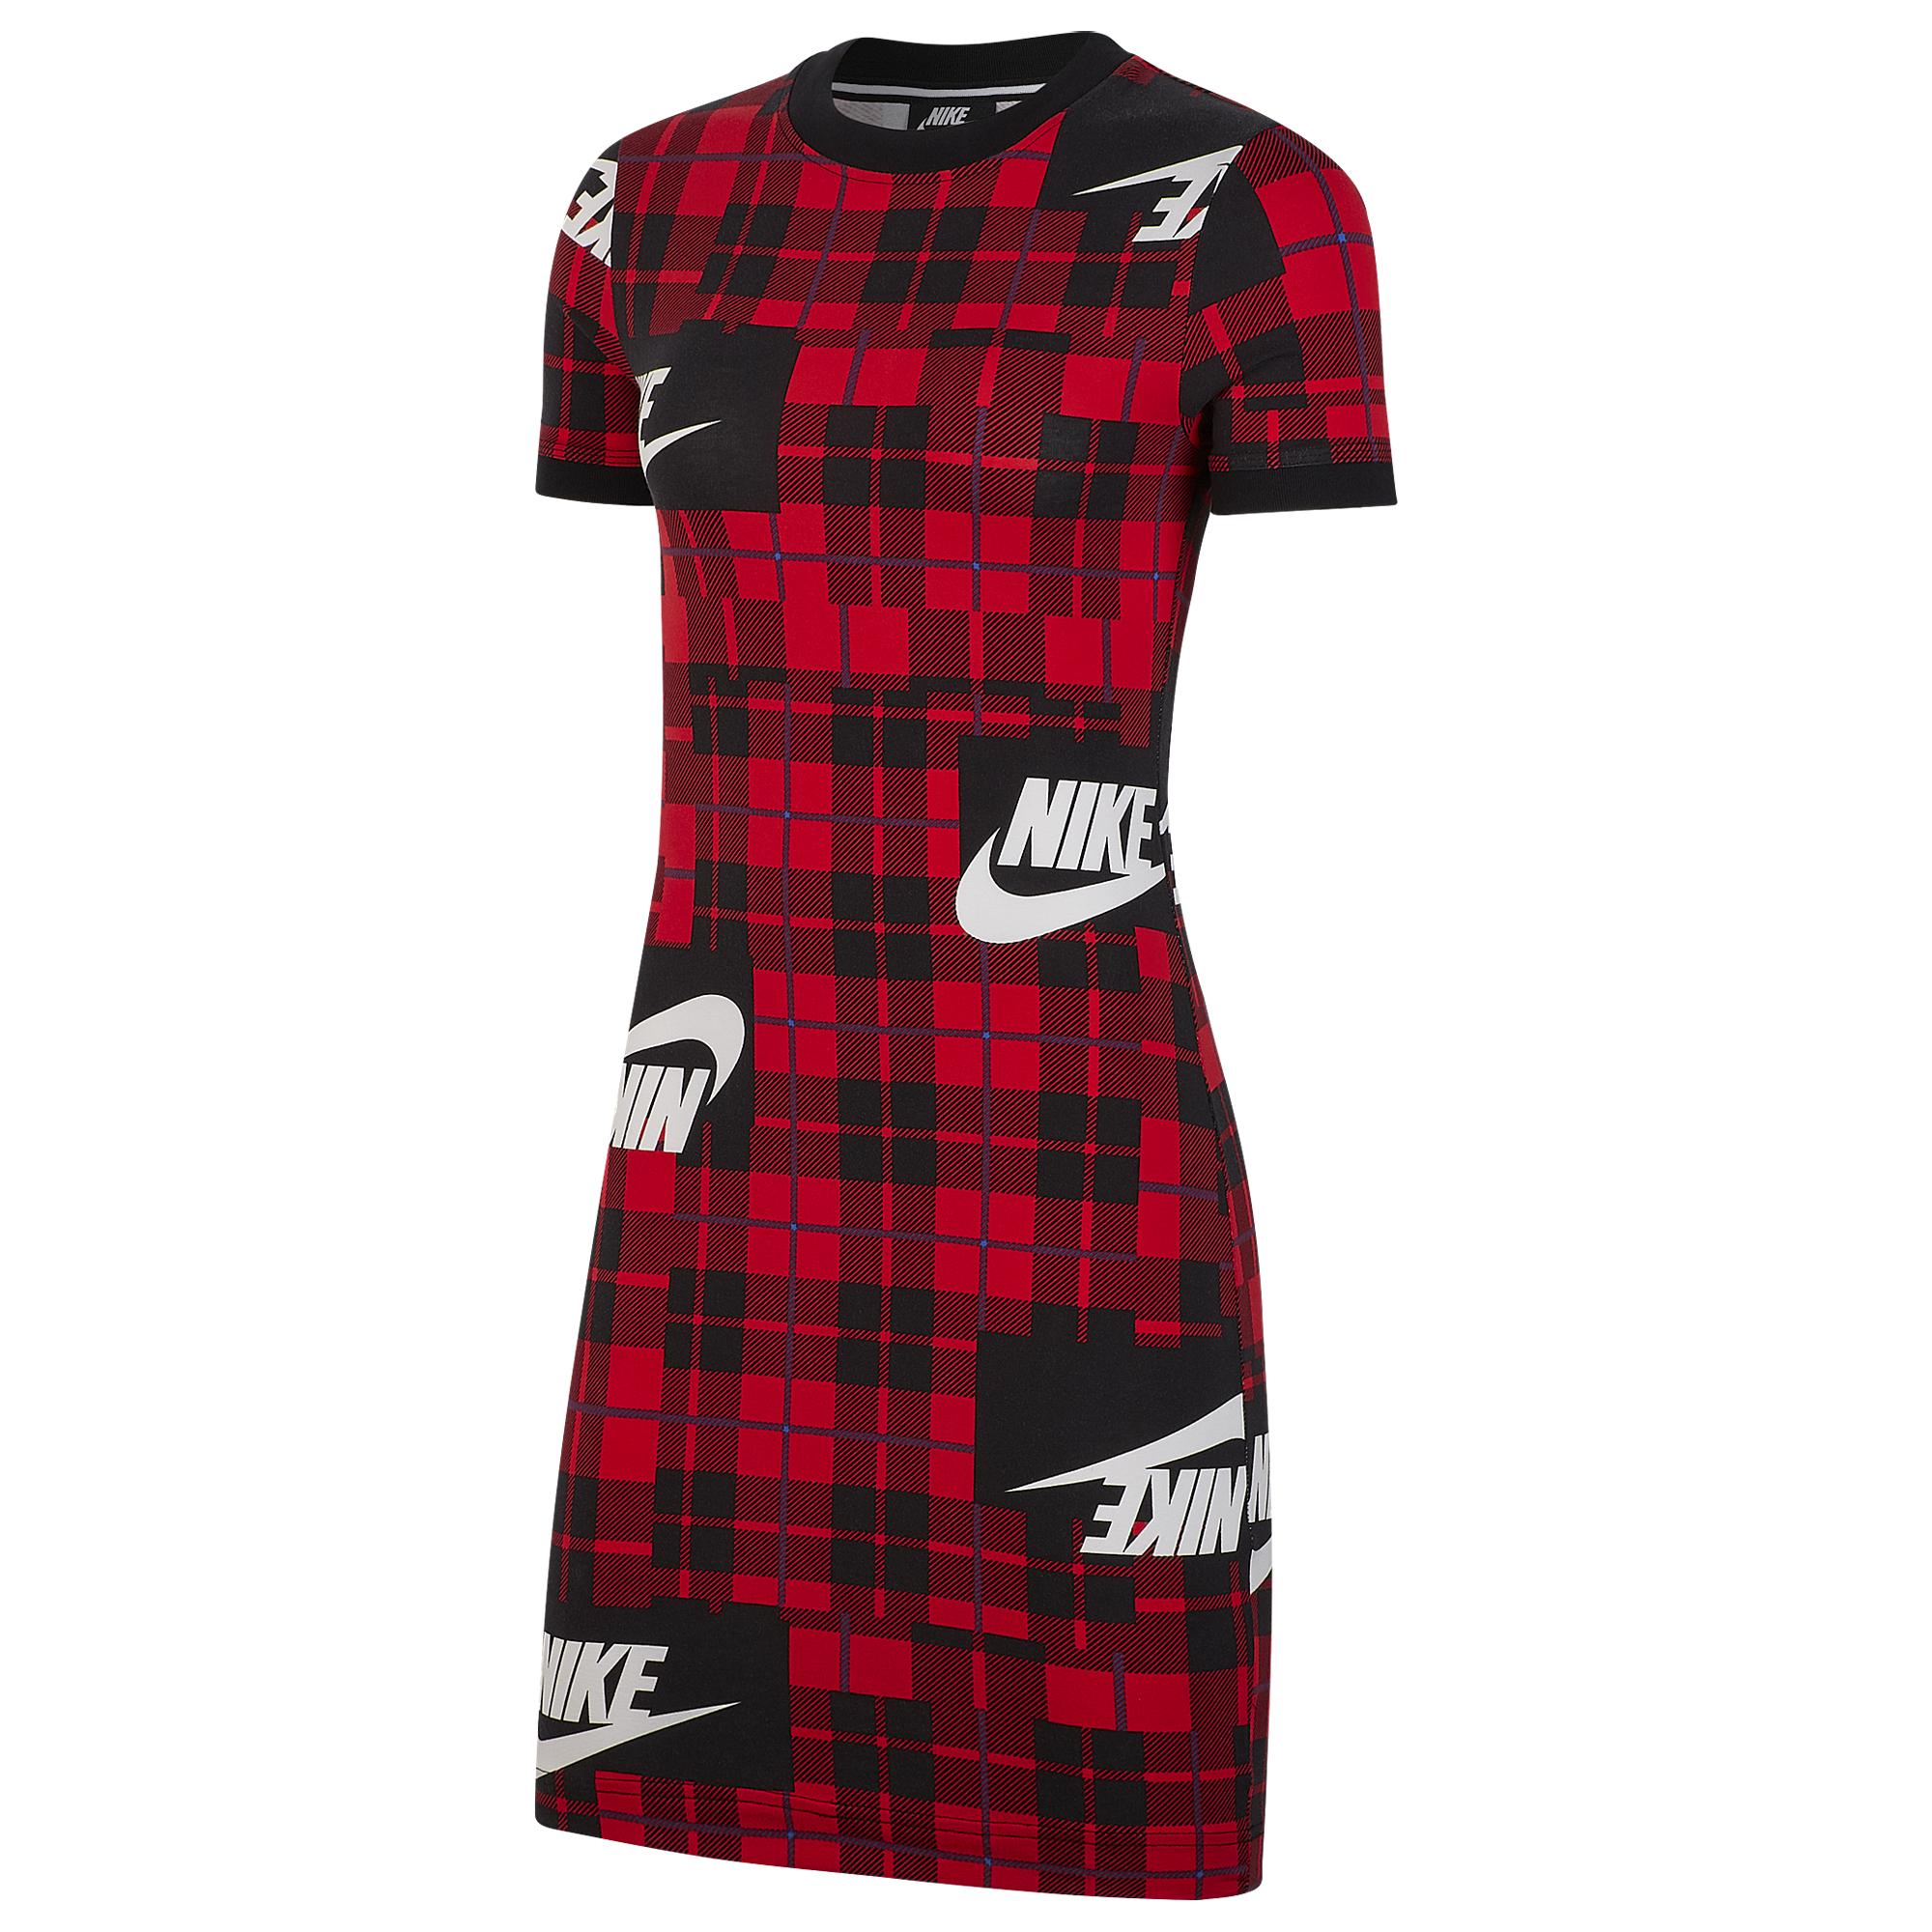 red shirt dress outfit